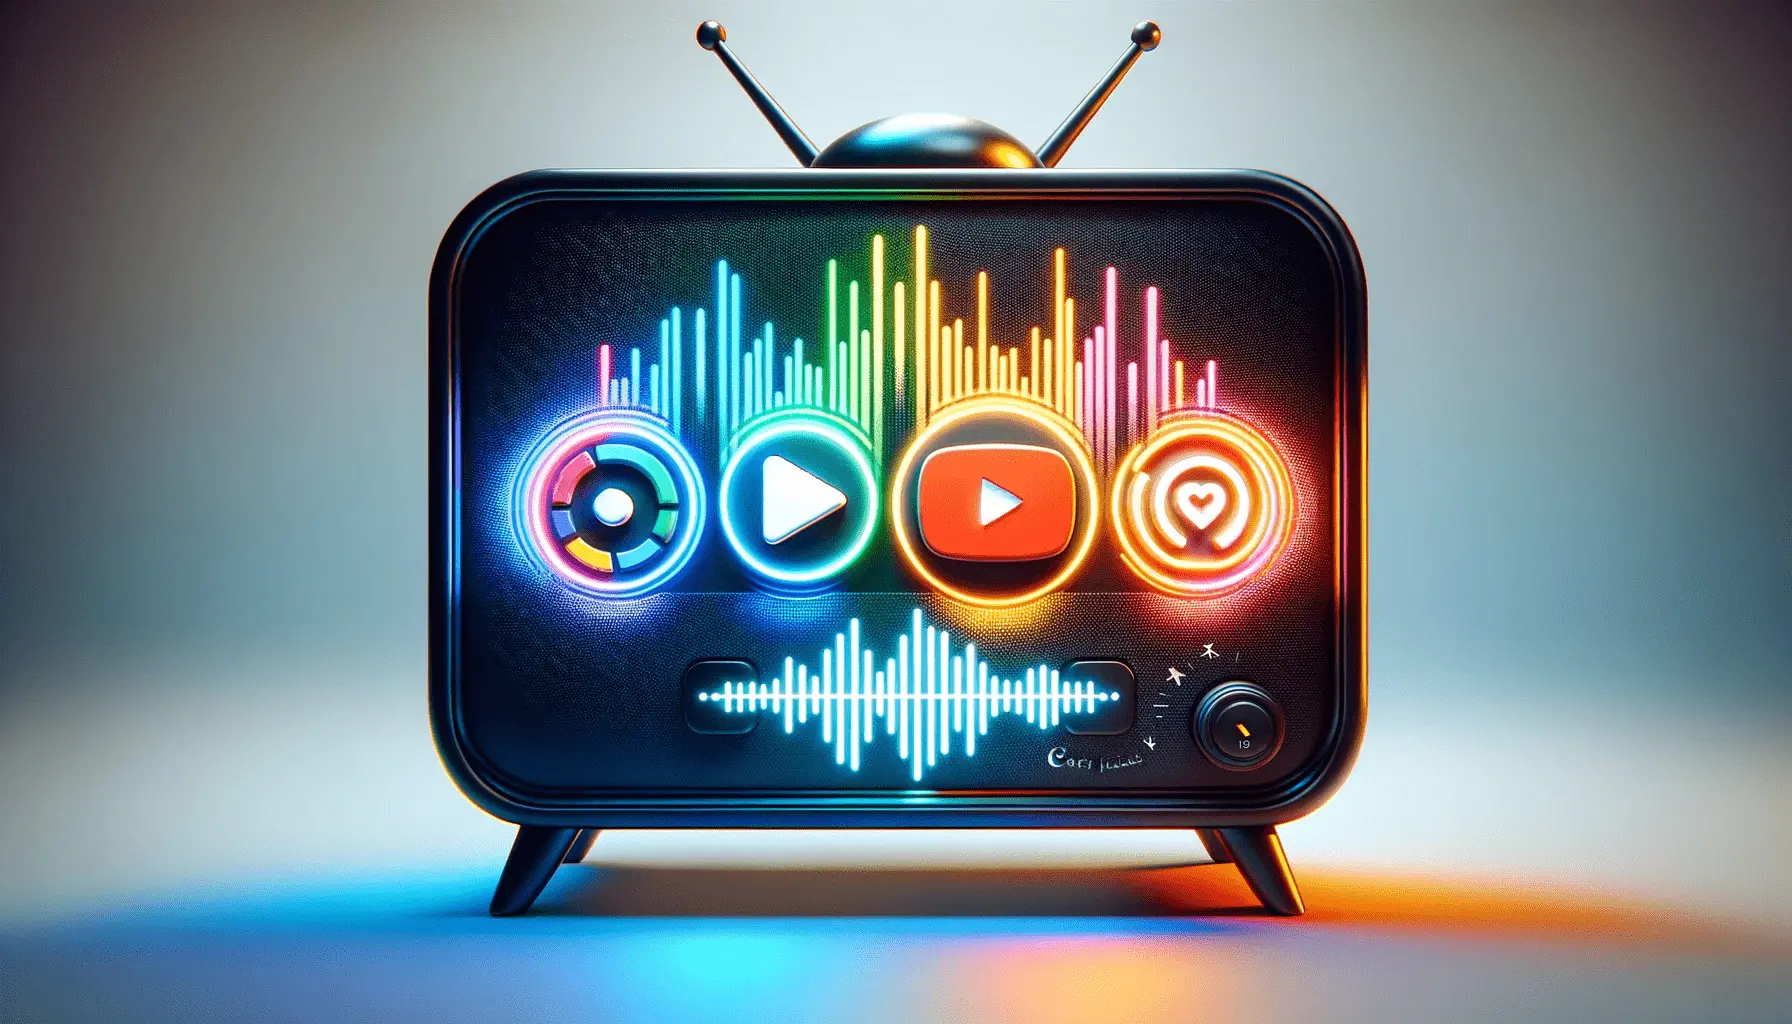 3 Ad Frequency Insights for YouTube Viewer Care